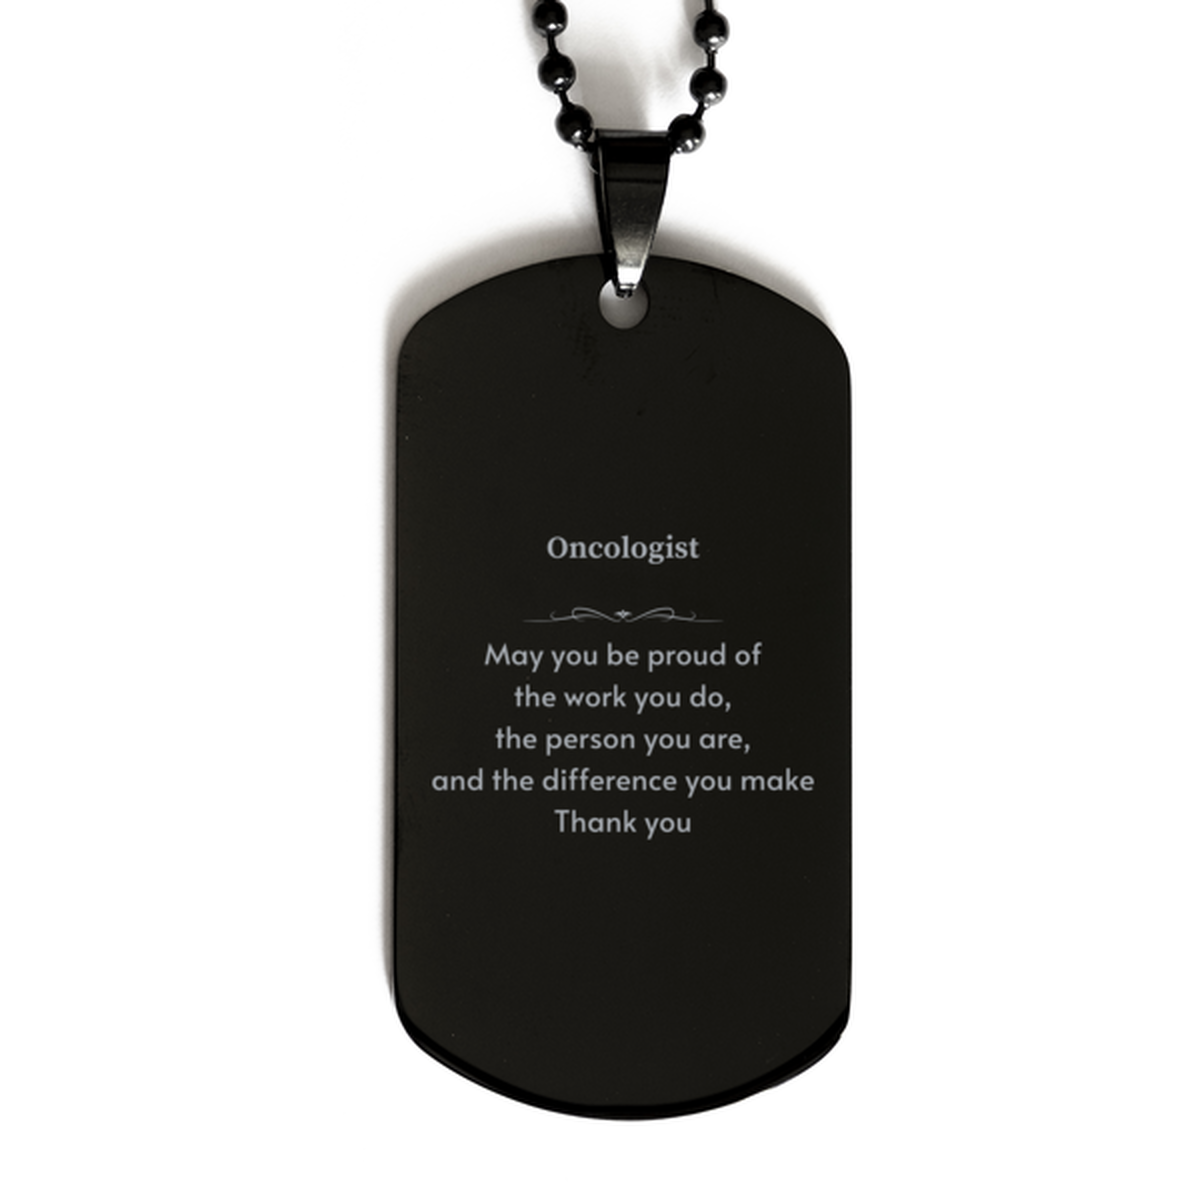 Heartwarming Black Dog Tag Retirement Coworkers Gifts for Oncologist, Oncologist May You be proud of the work you do, the person you are Gifts for Boss Men Women Friends